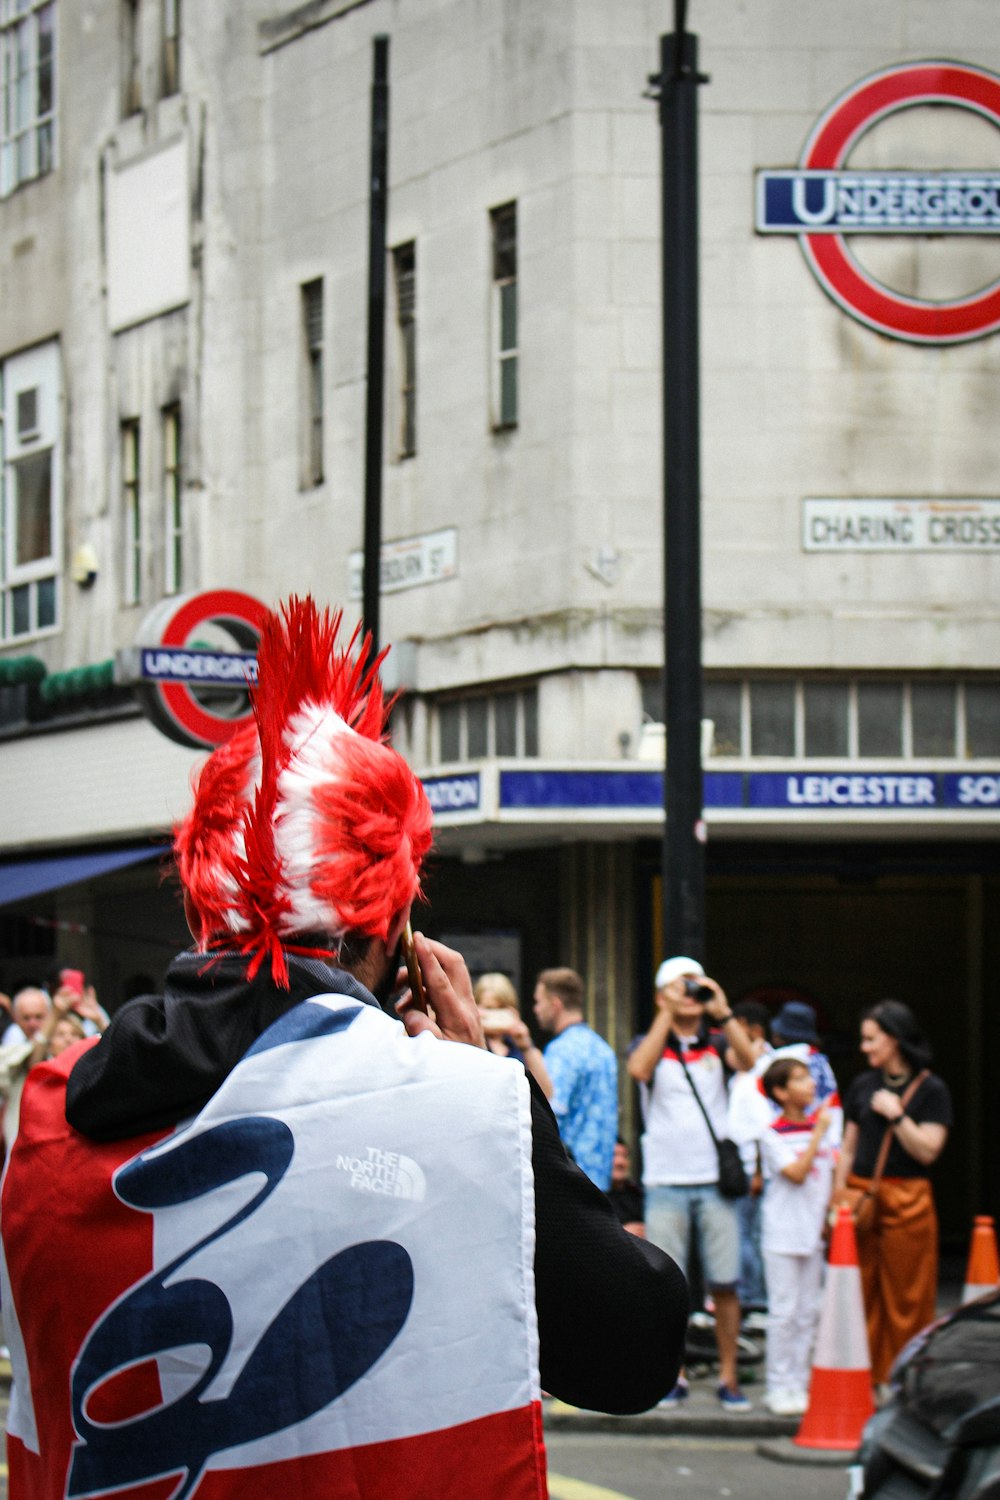 people in white shirt and red wig standing on street during daytime